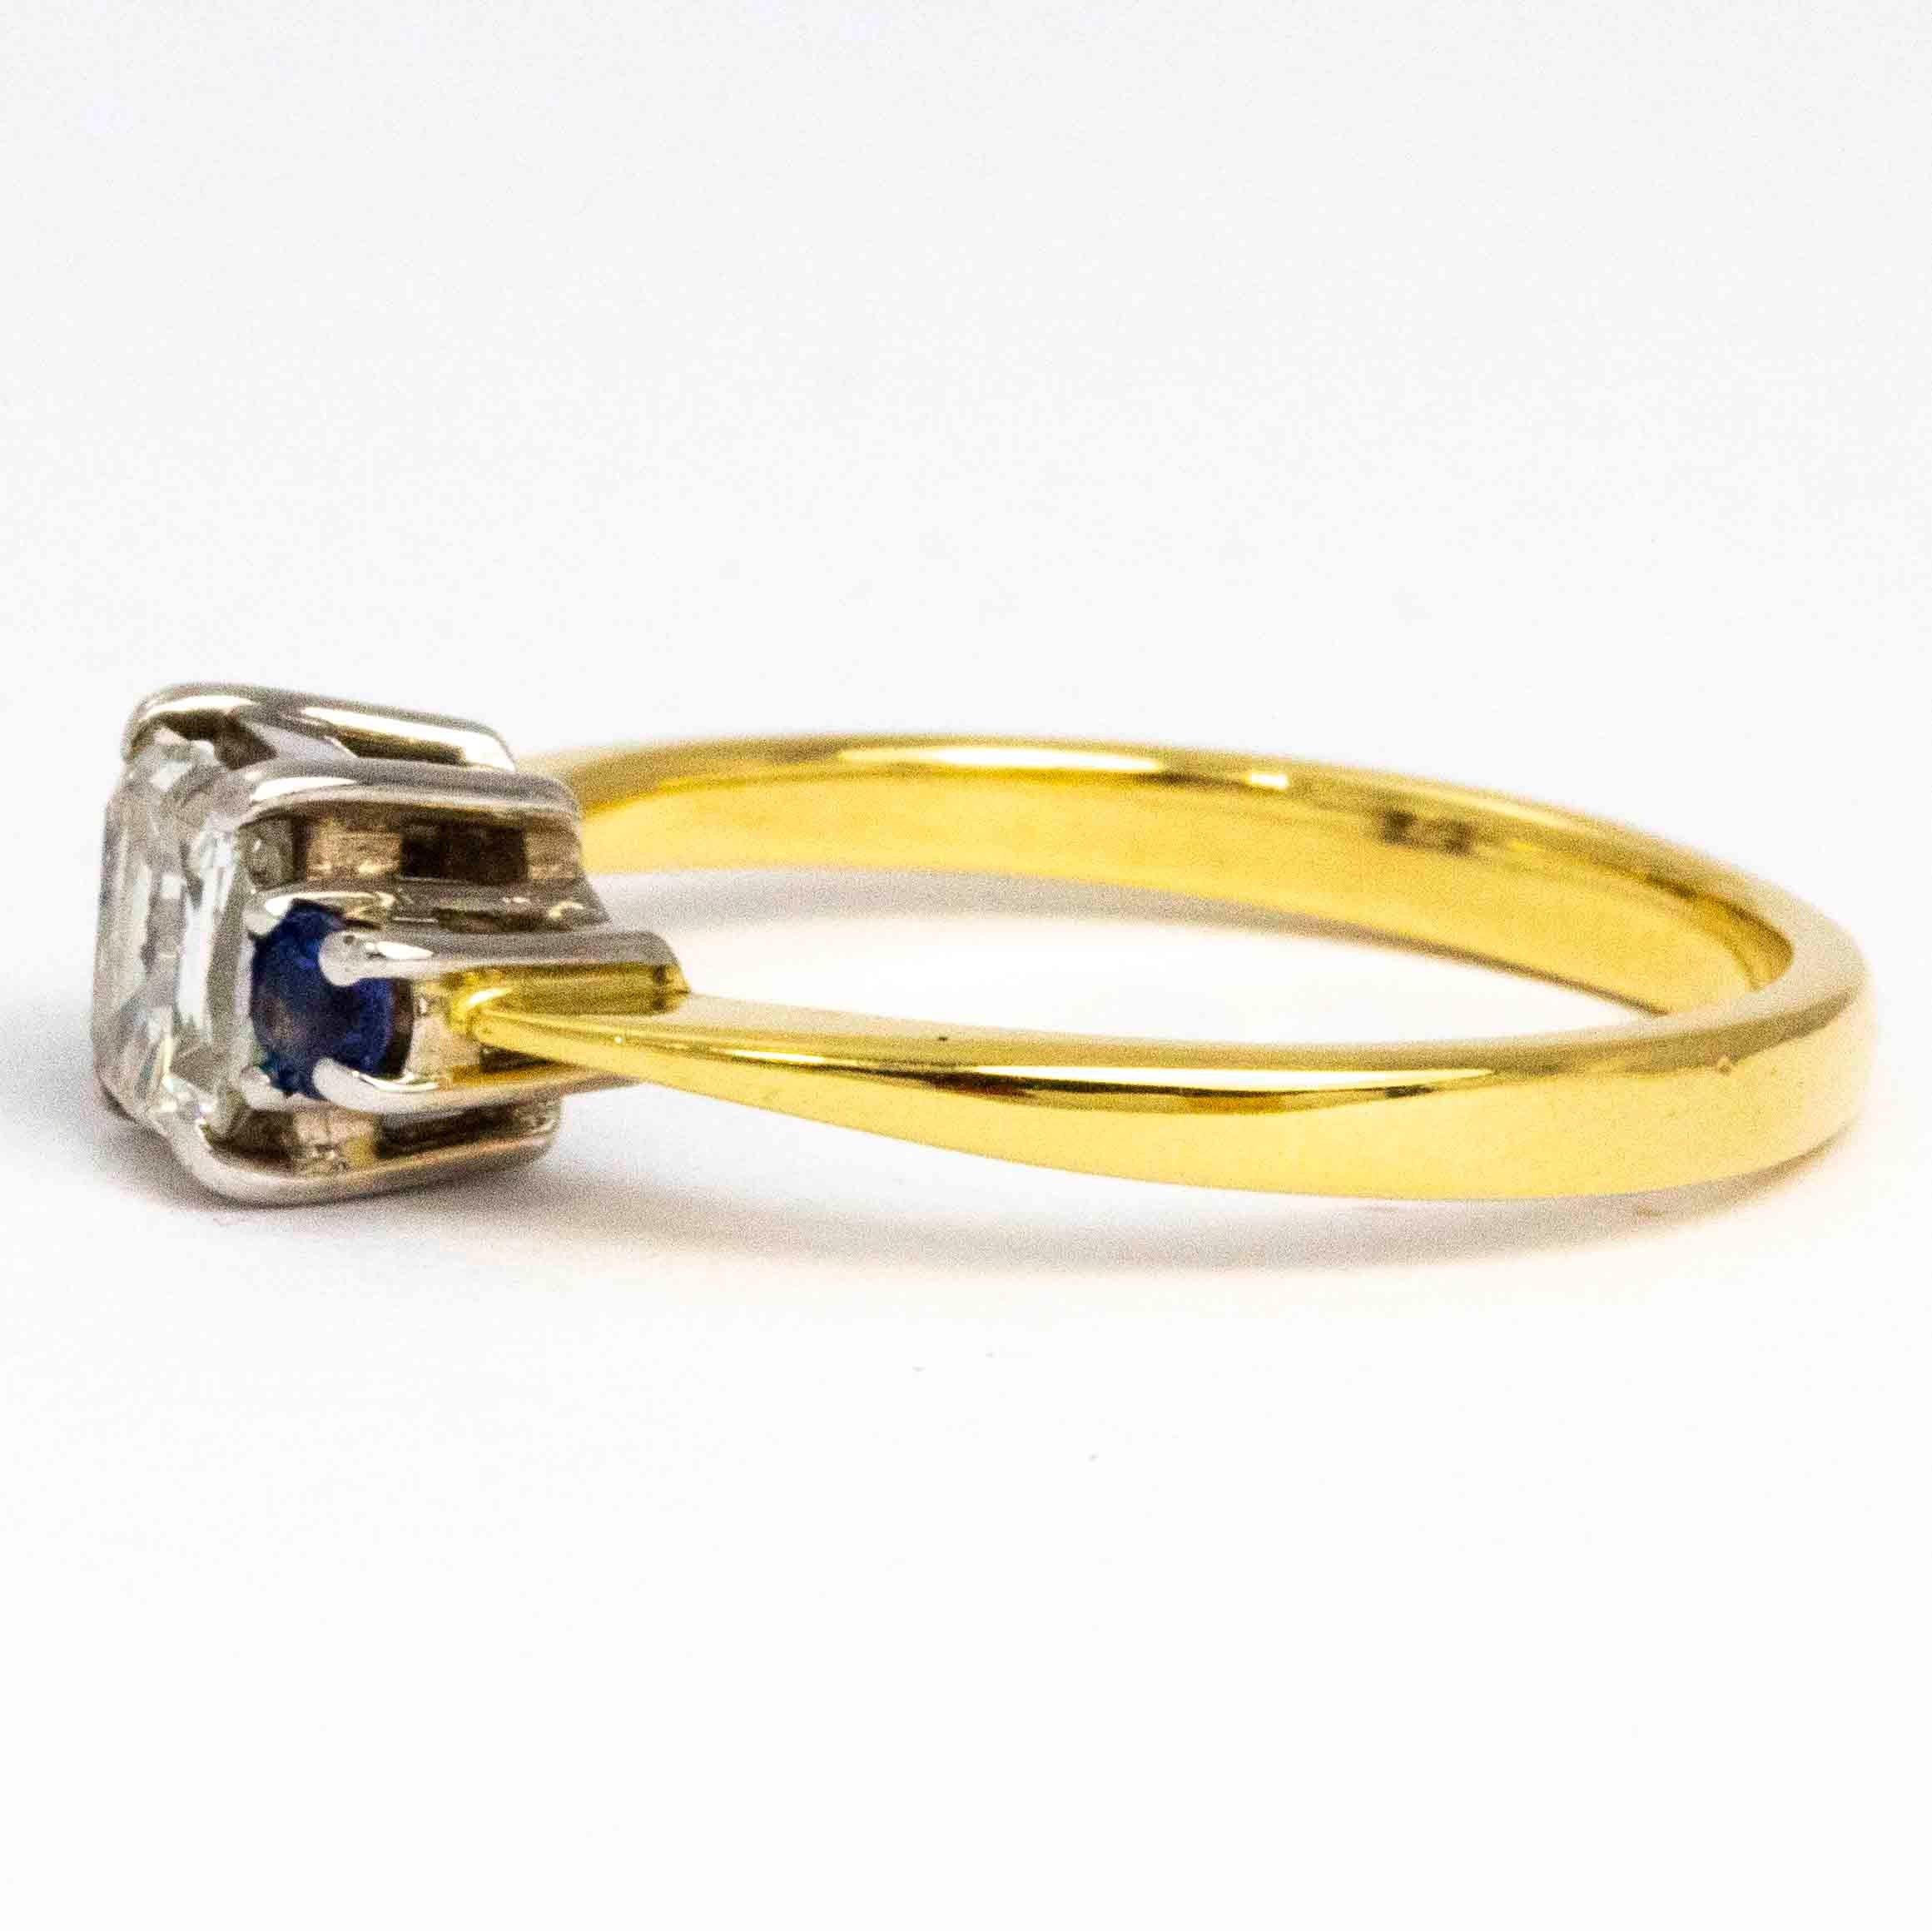 The bright sparkling emerald cut diamond at the centre of this three stone ring is beautiful and complemented perfectly by a sapphire either side. The stones are set in platinum and the band is modelled in 18ct gold. Measuring 65pts, the diamond is